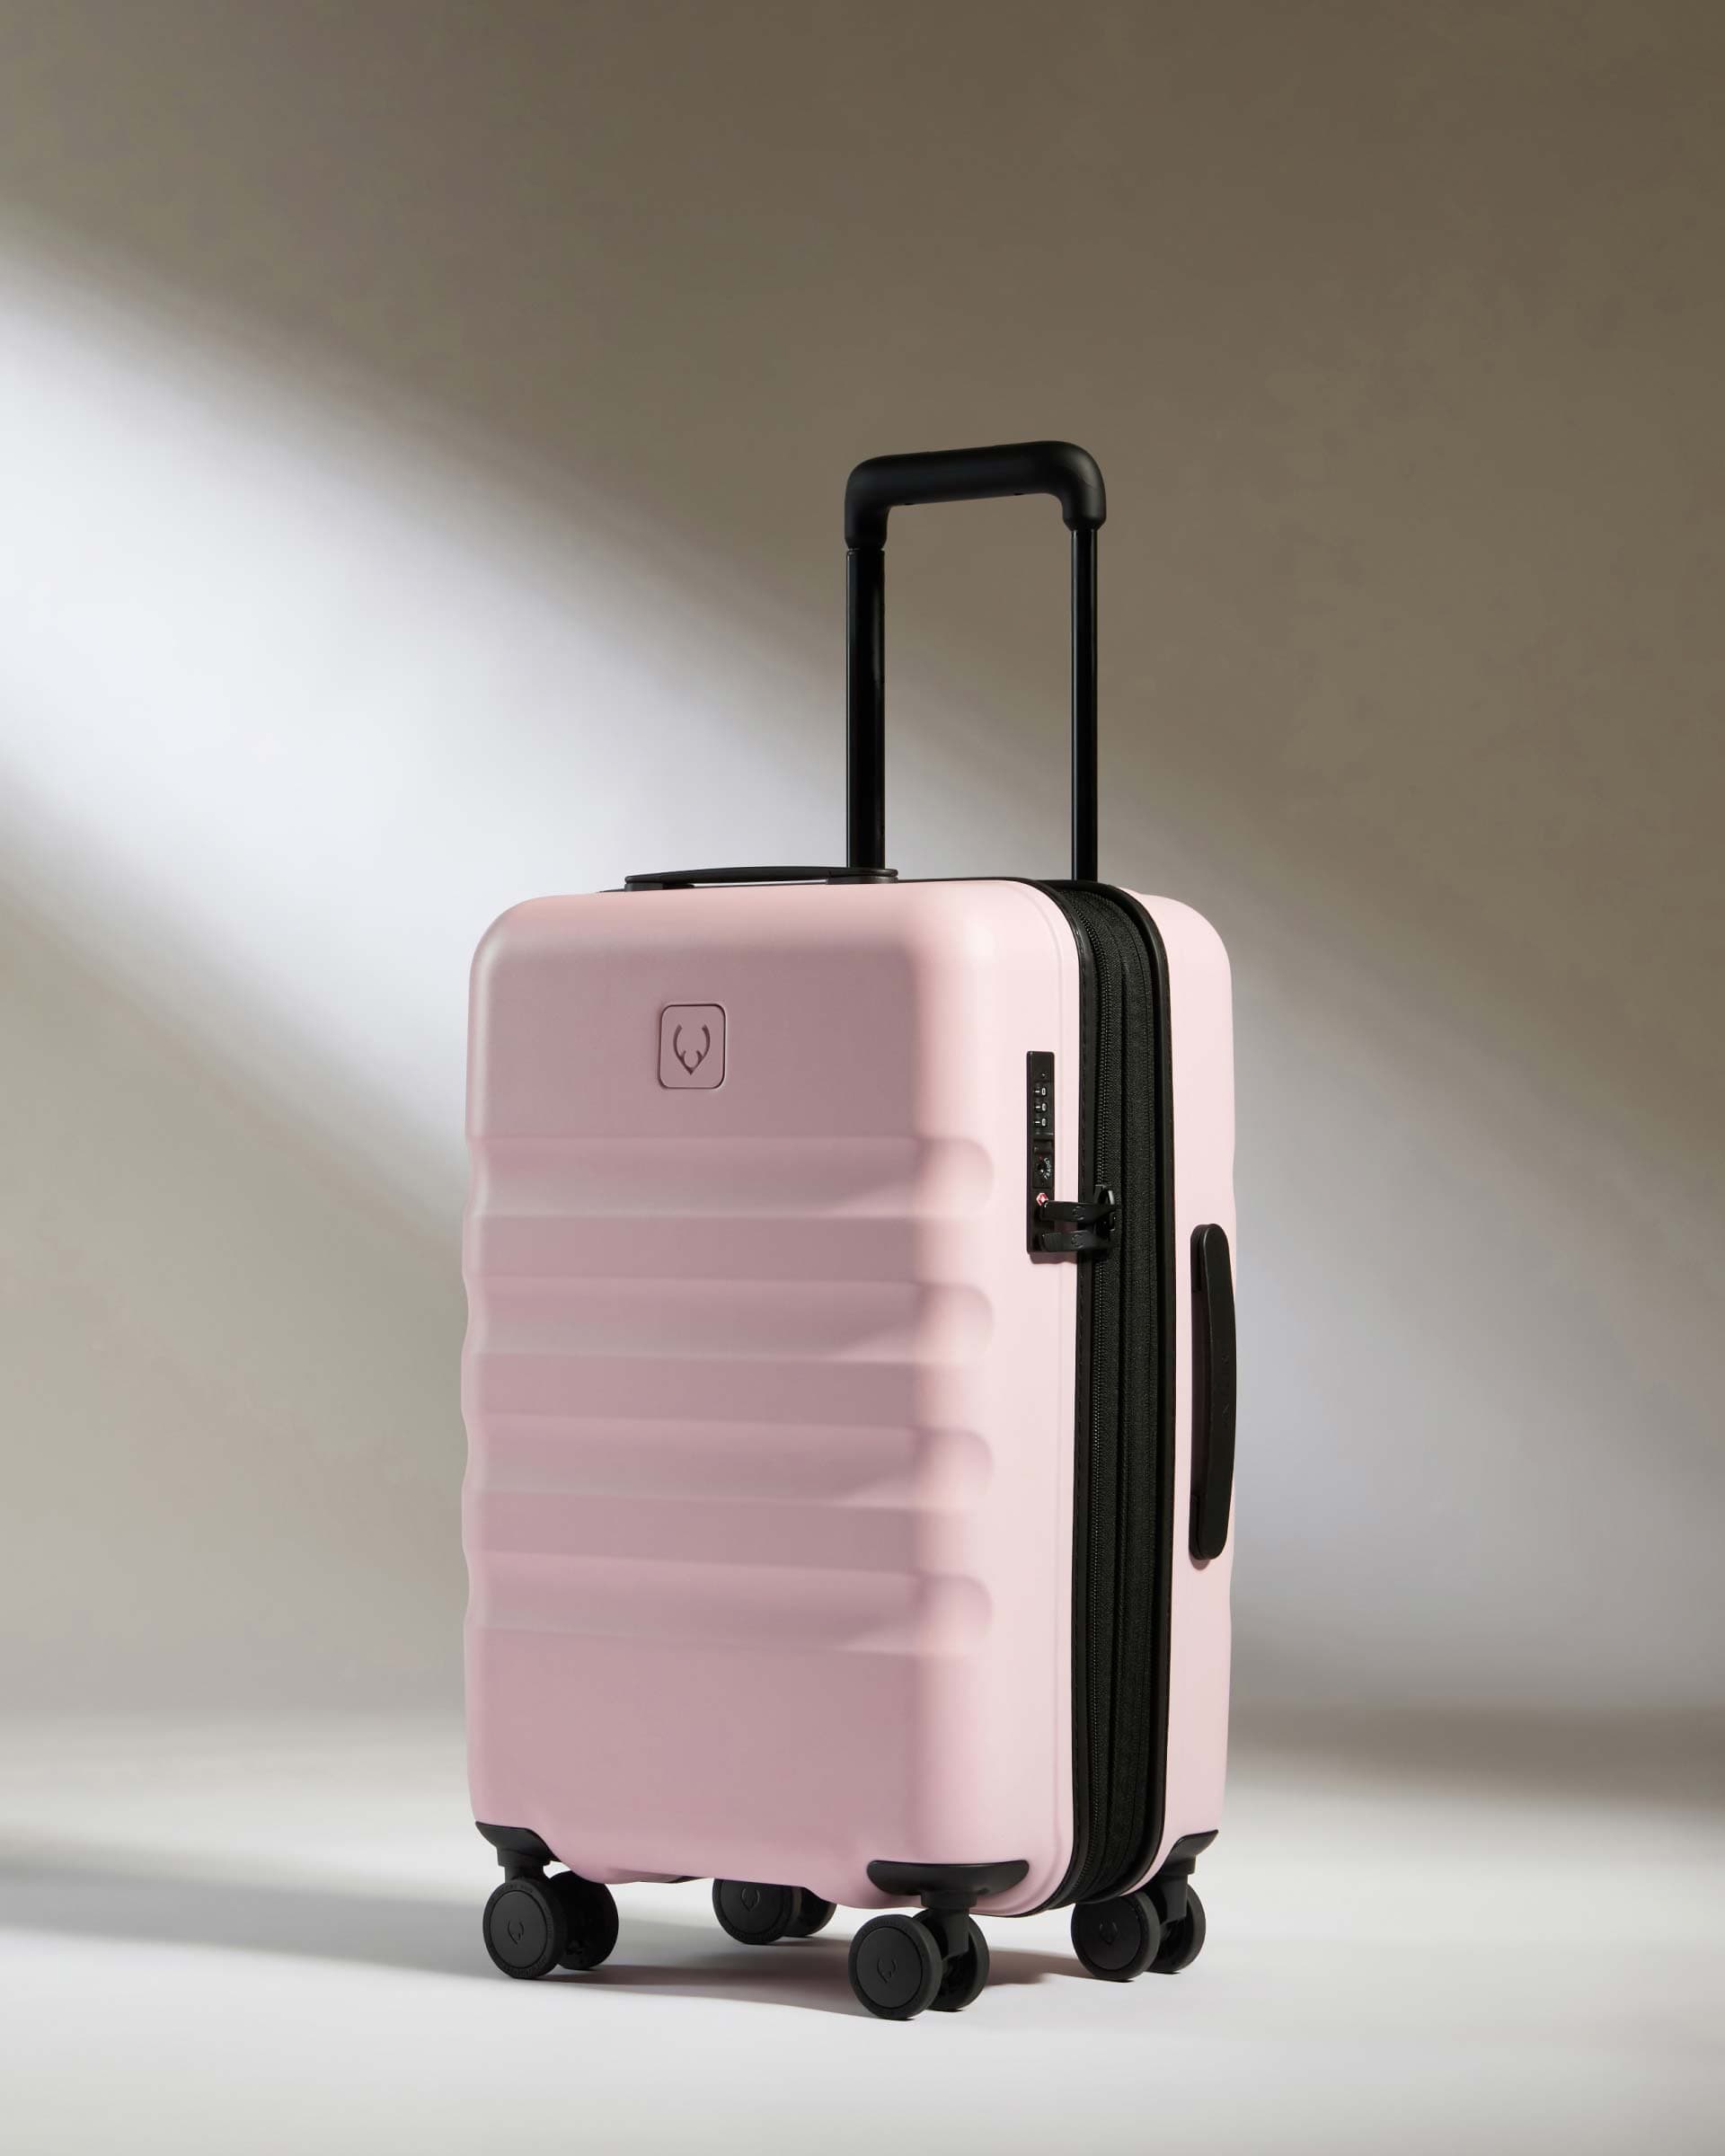 View Antler Icon Stripe Cabin Suitcase With Expander In Moorland Pink Size 23cm x 55cm x 36cm information